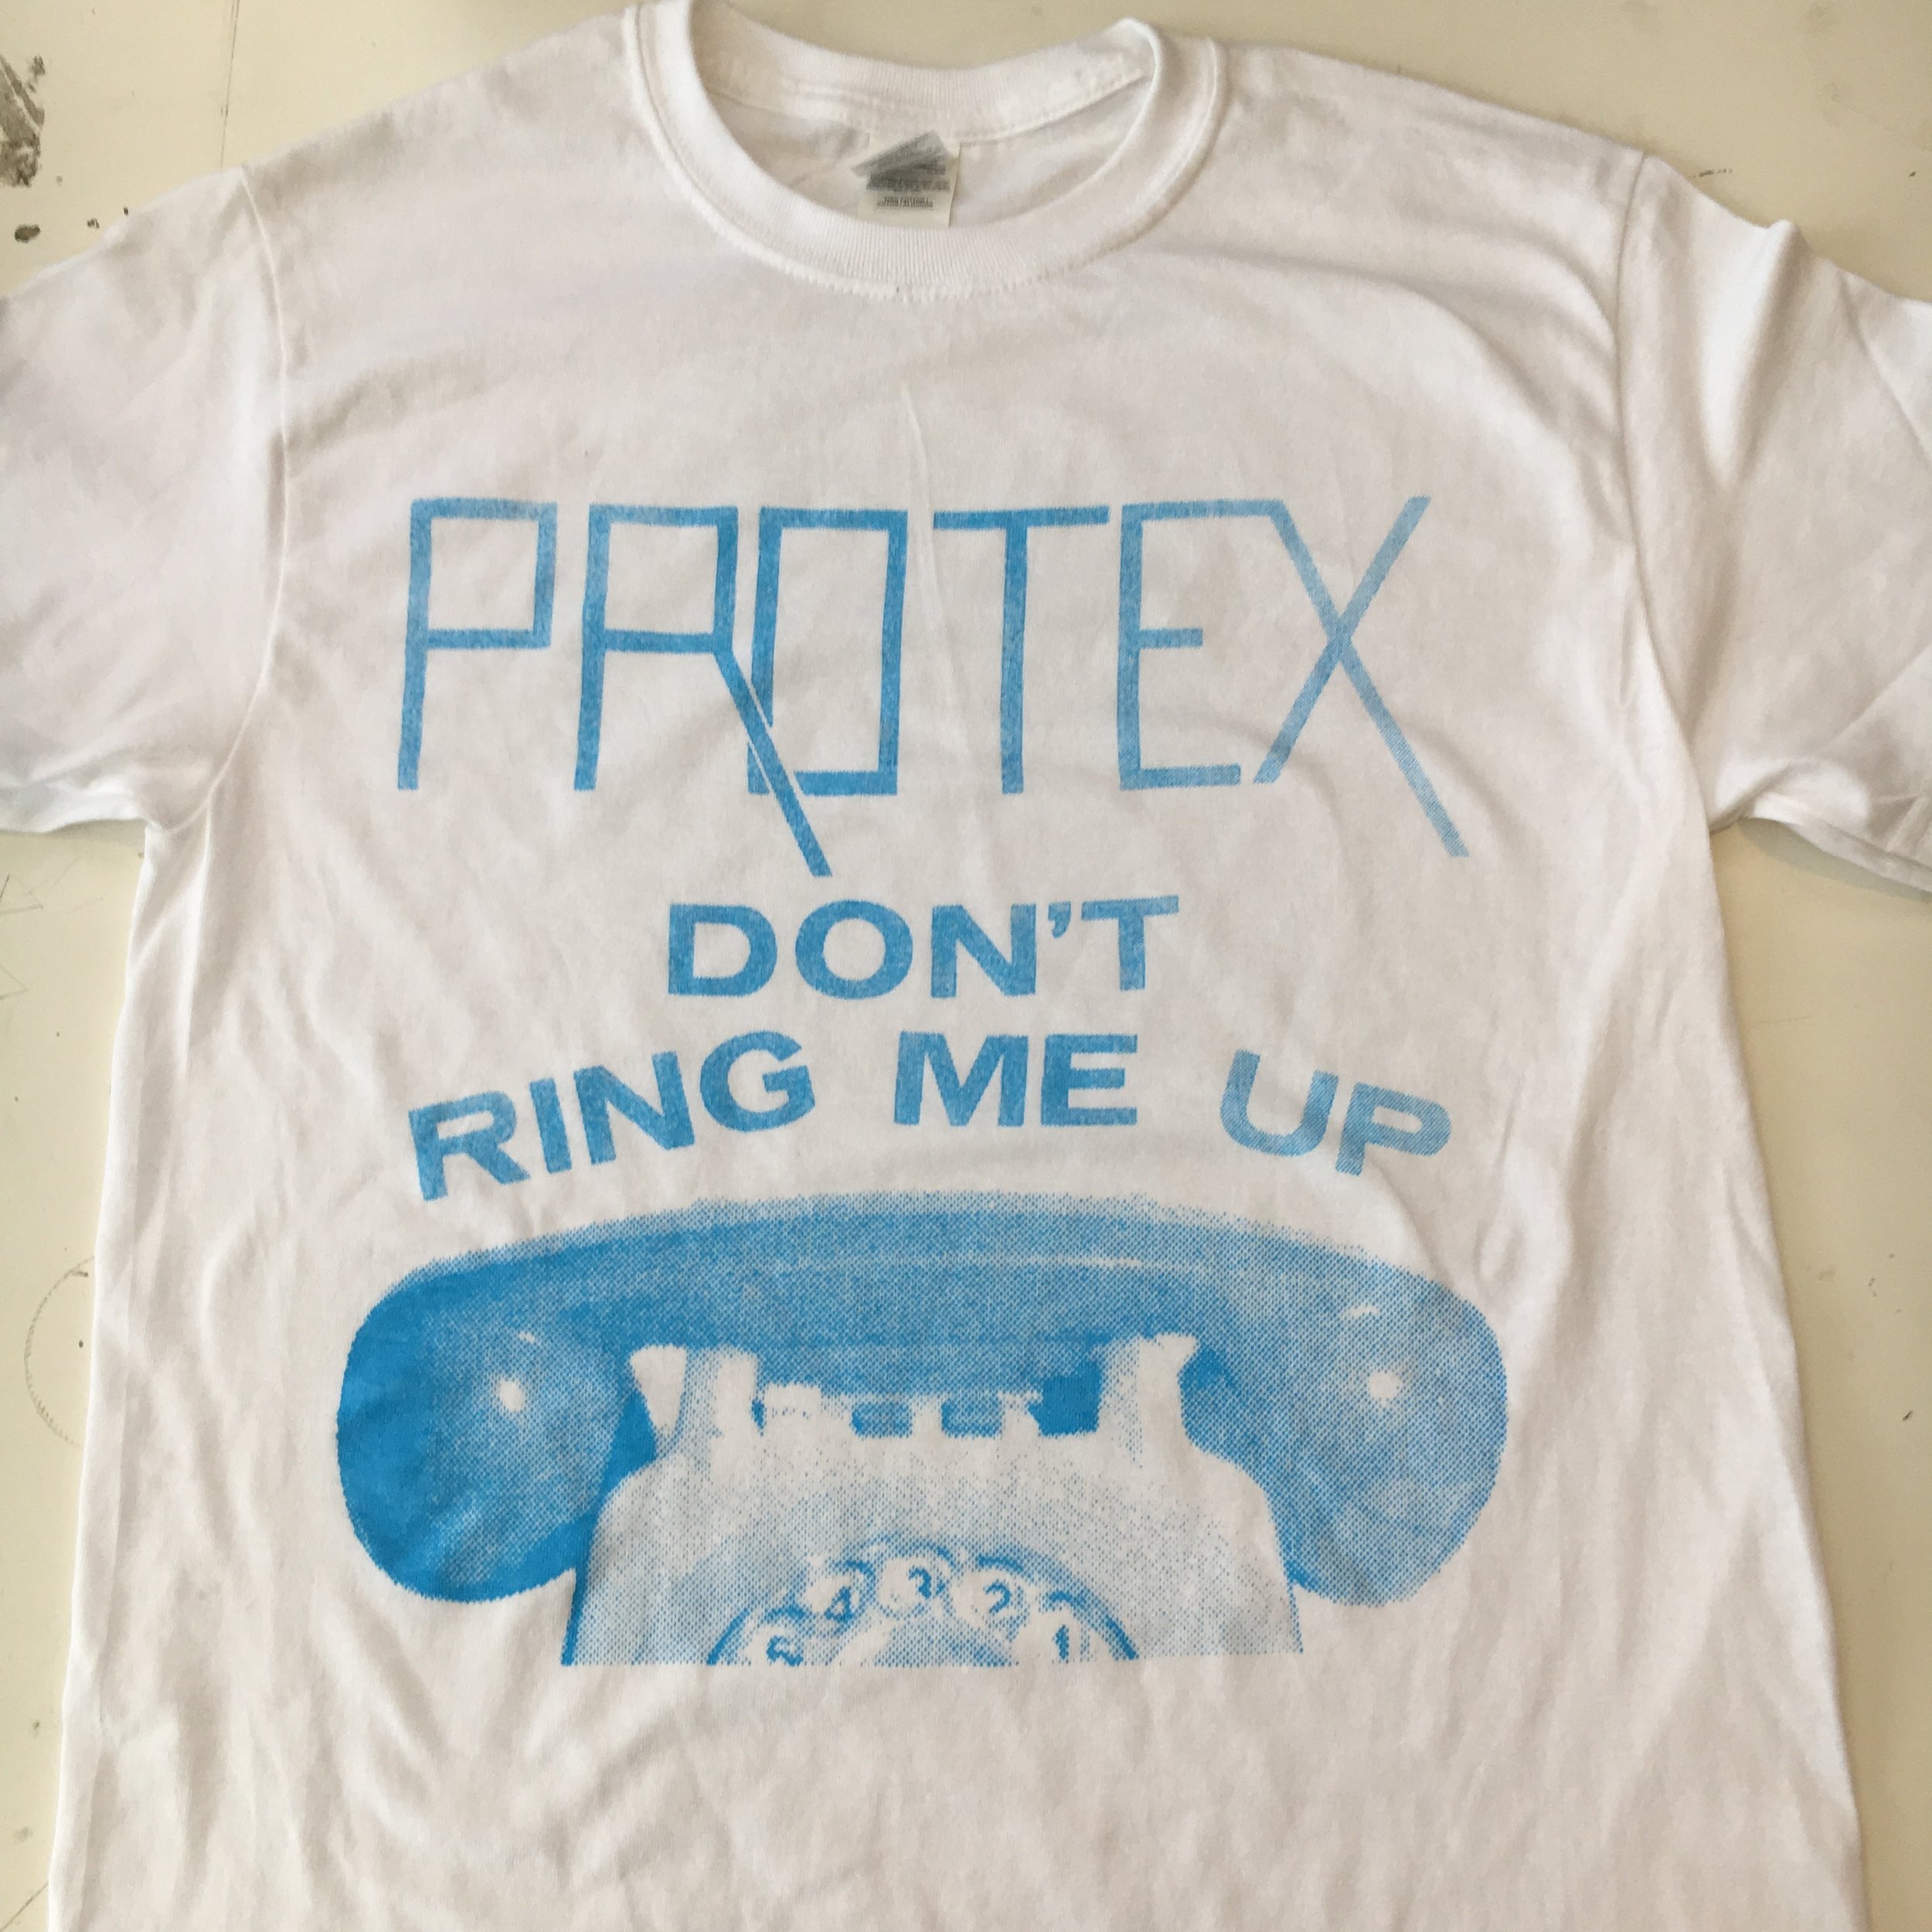  Official shirts printed for Protex (Ireland) 